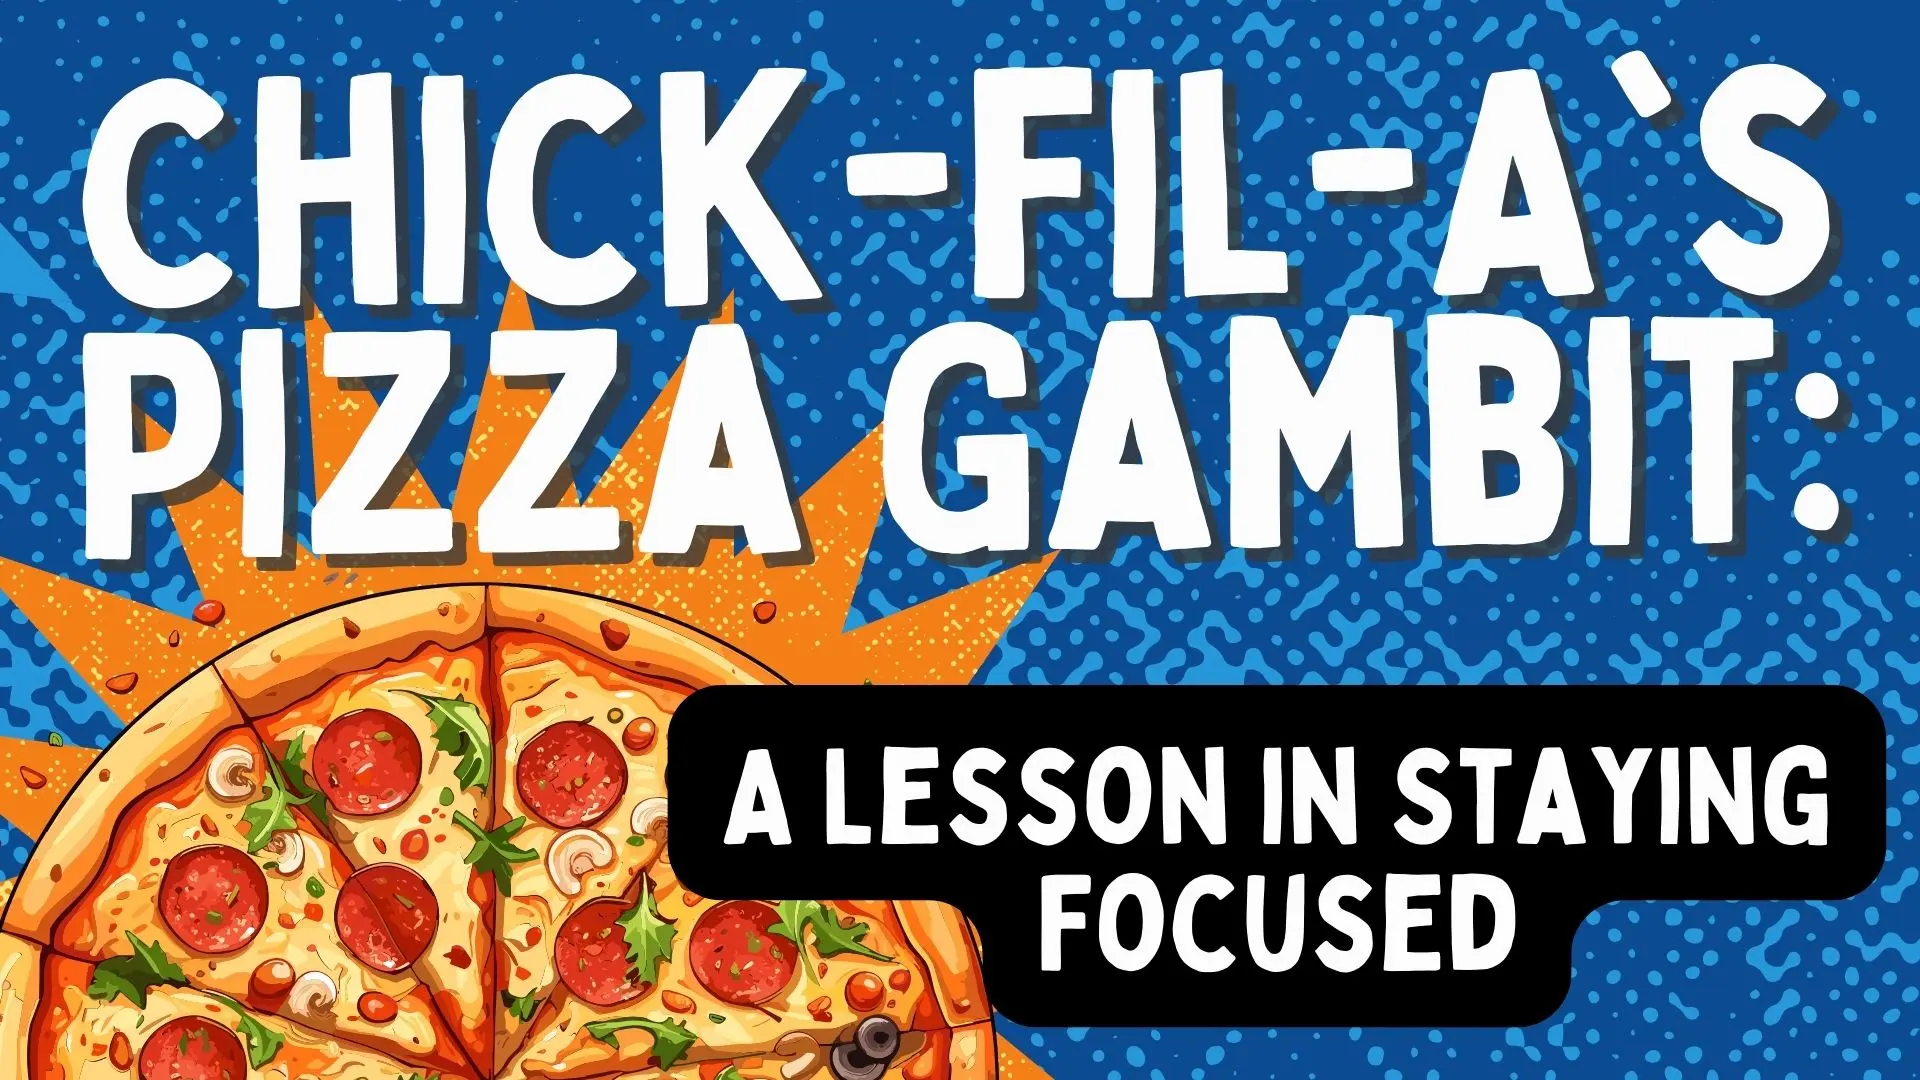 Chick-fil-A’s Pizza Gambit: A Lesson in Staying Focused